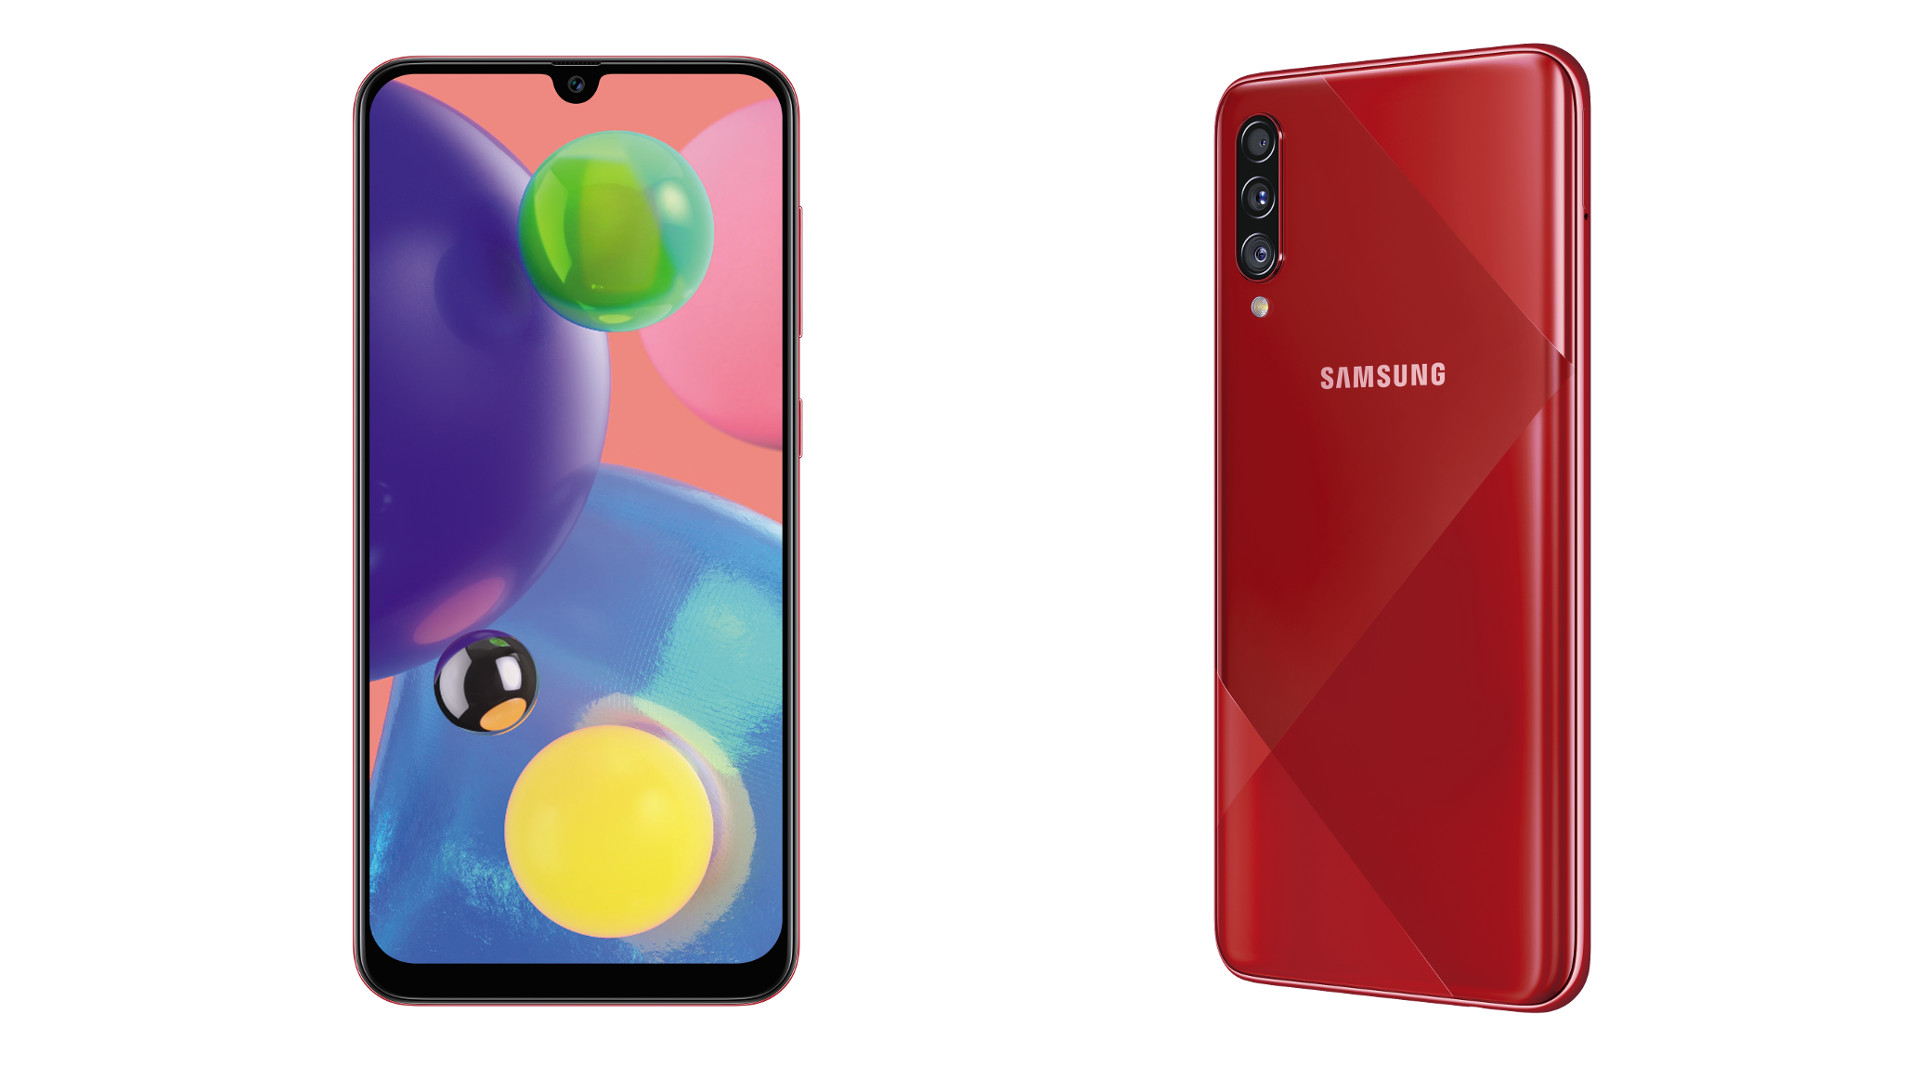 Samsung Galaxy Note10 Now Comes With Free Galaxy Buds And Galaxy